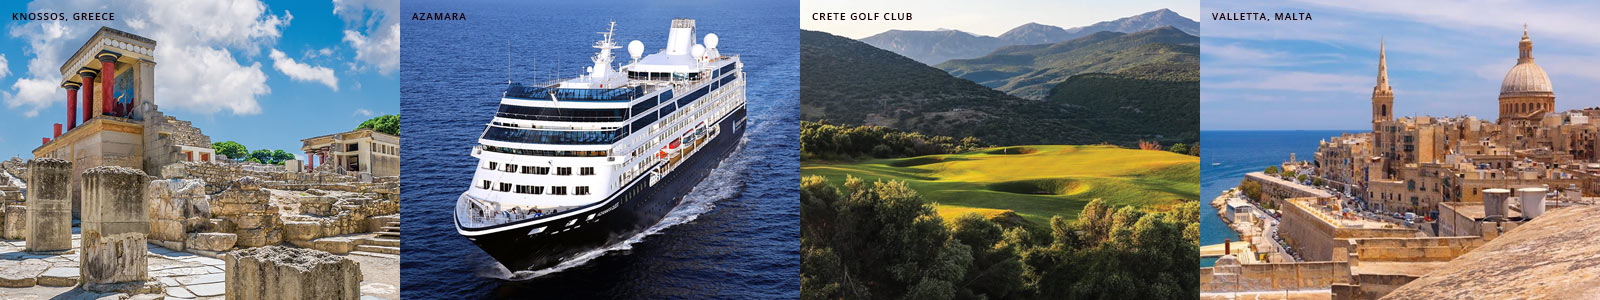 Mediterranean Islands Golf Vacation Tours and Golf Cruises